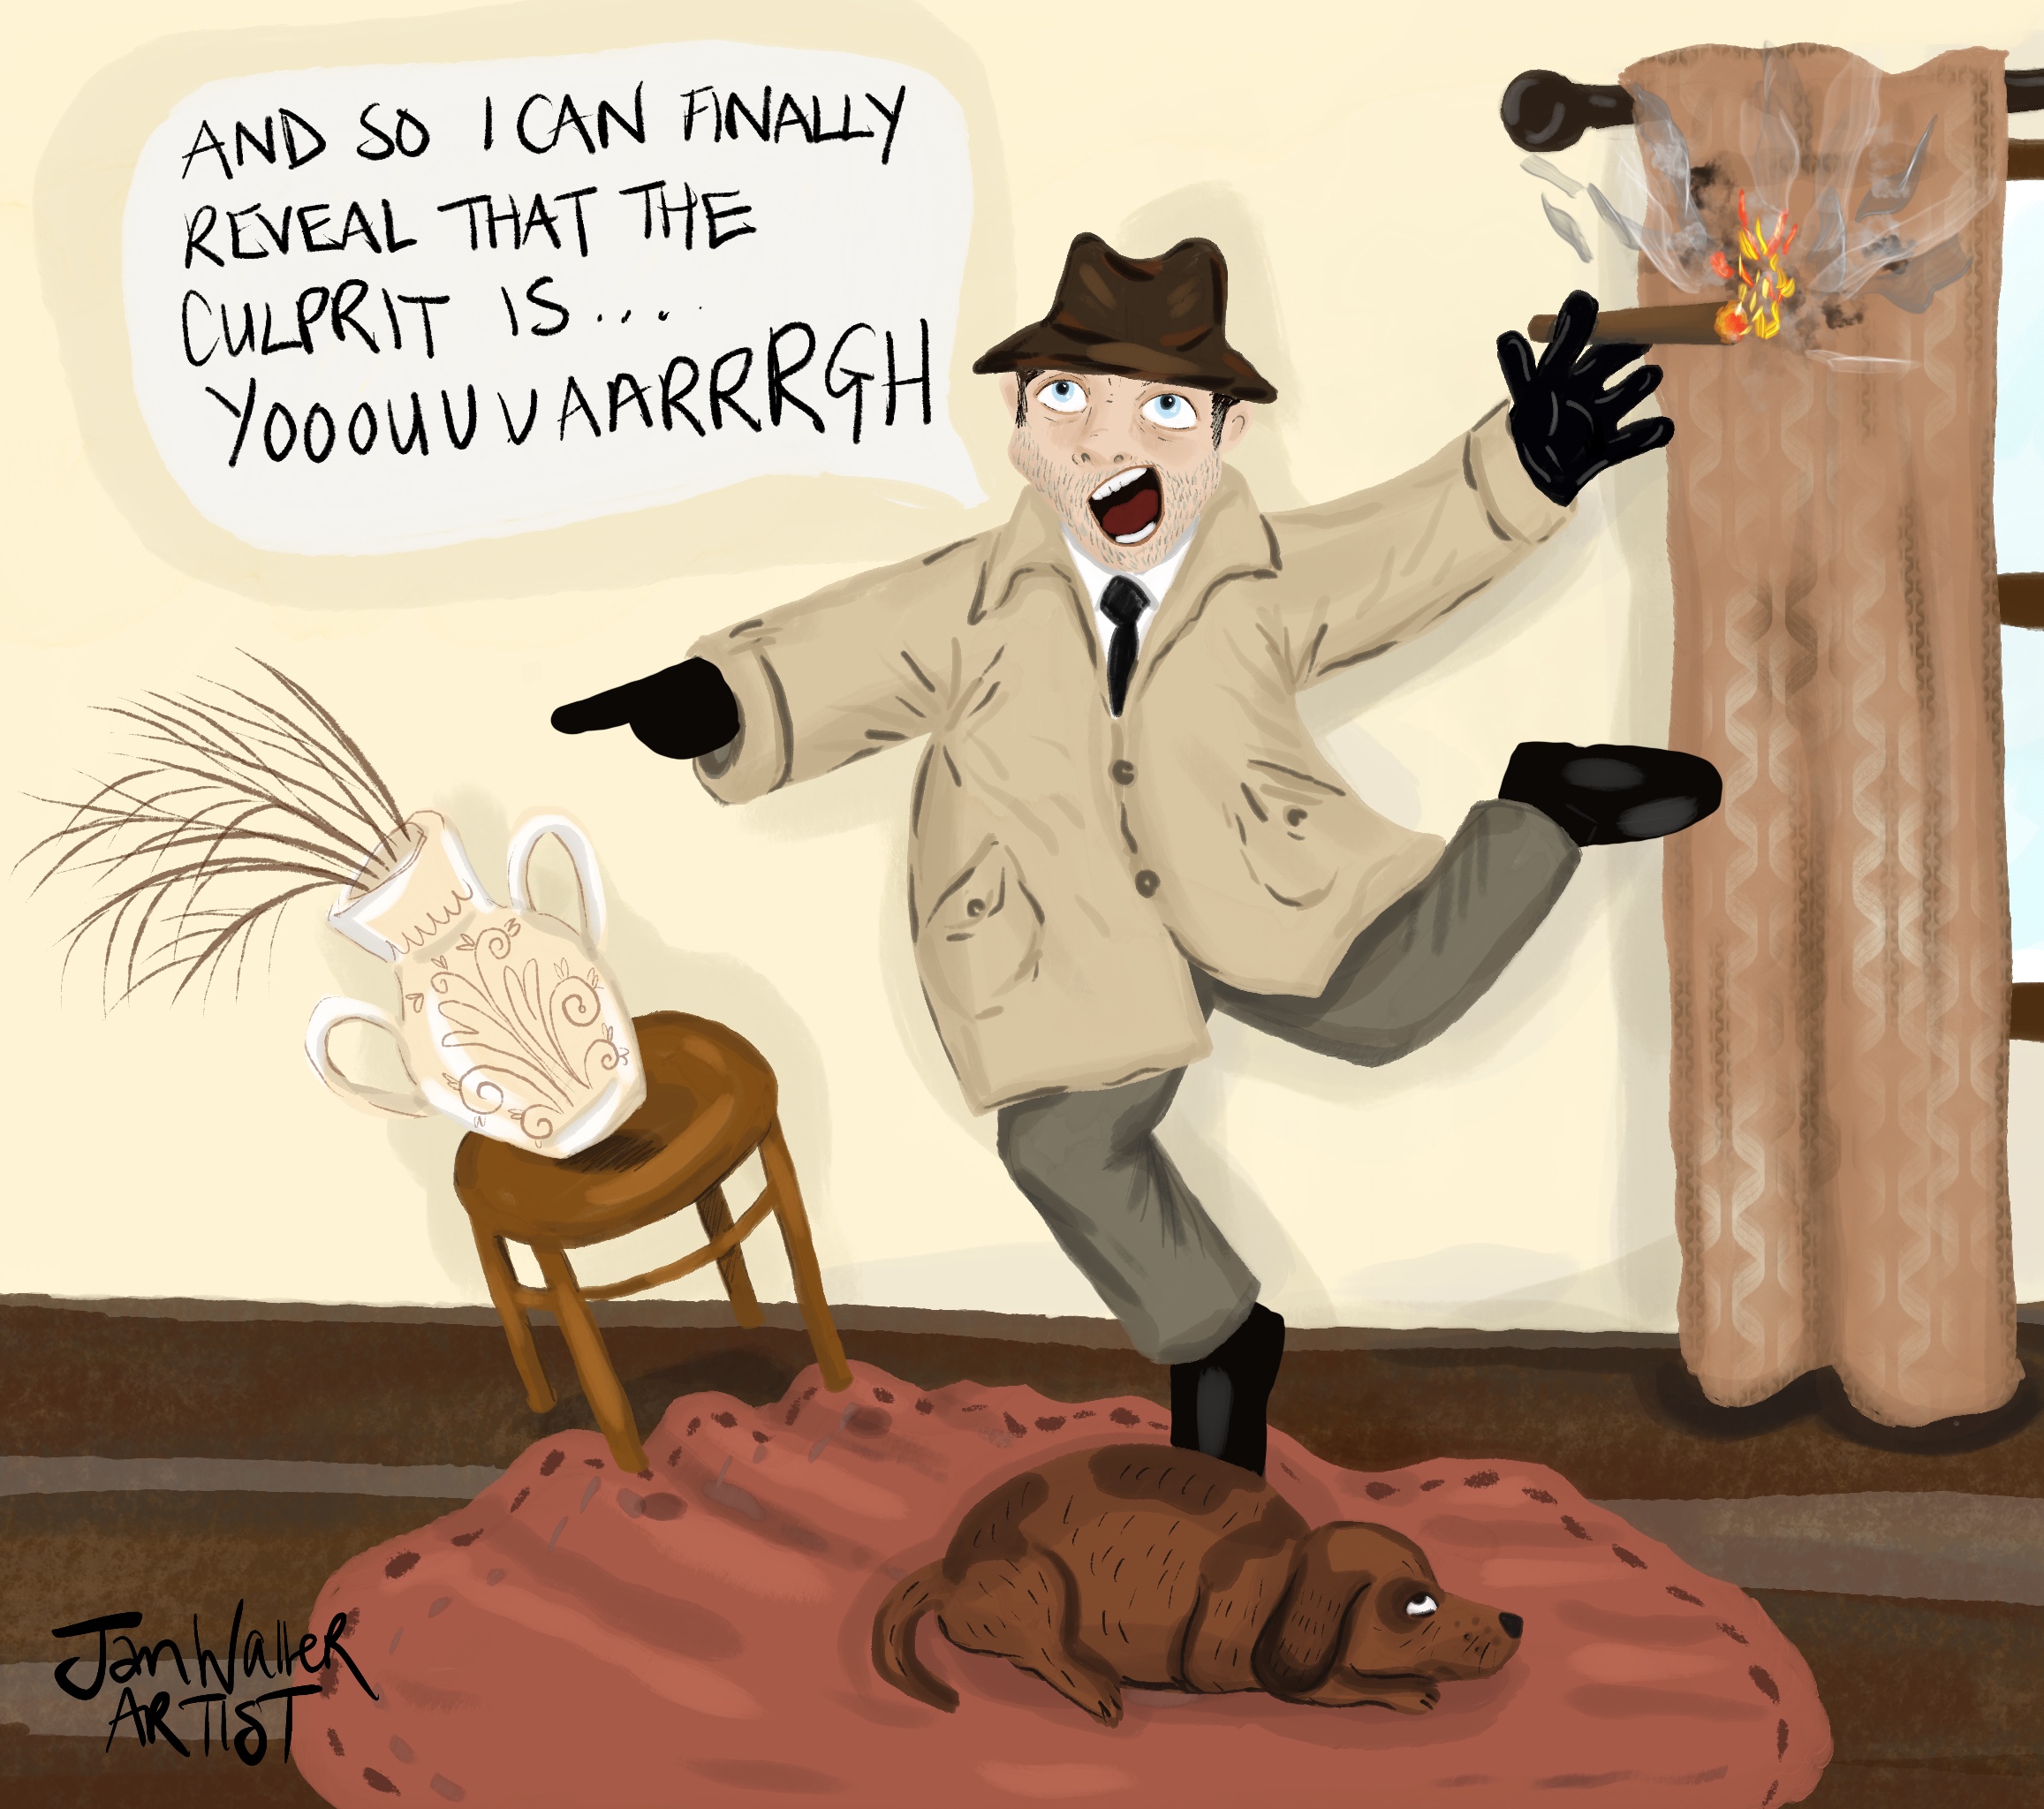 A clumsy shouting detective #fridaydoodleclub
